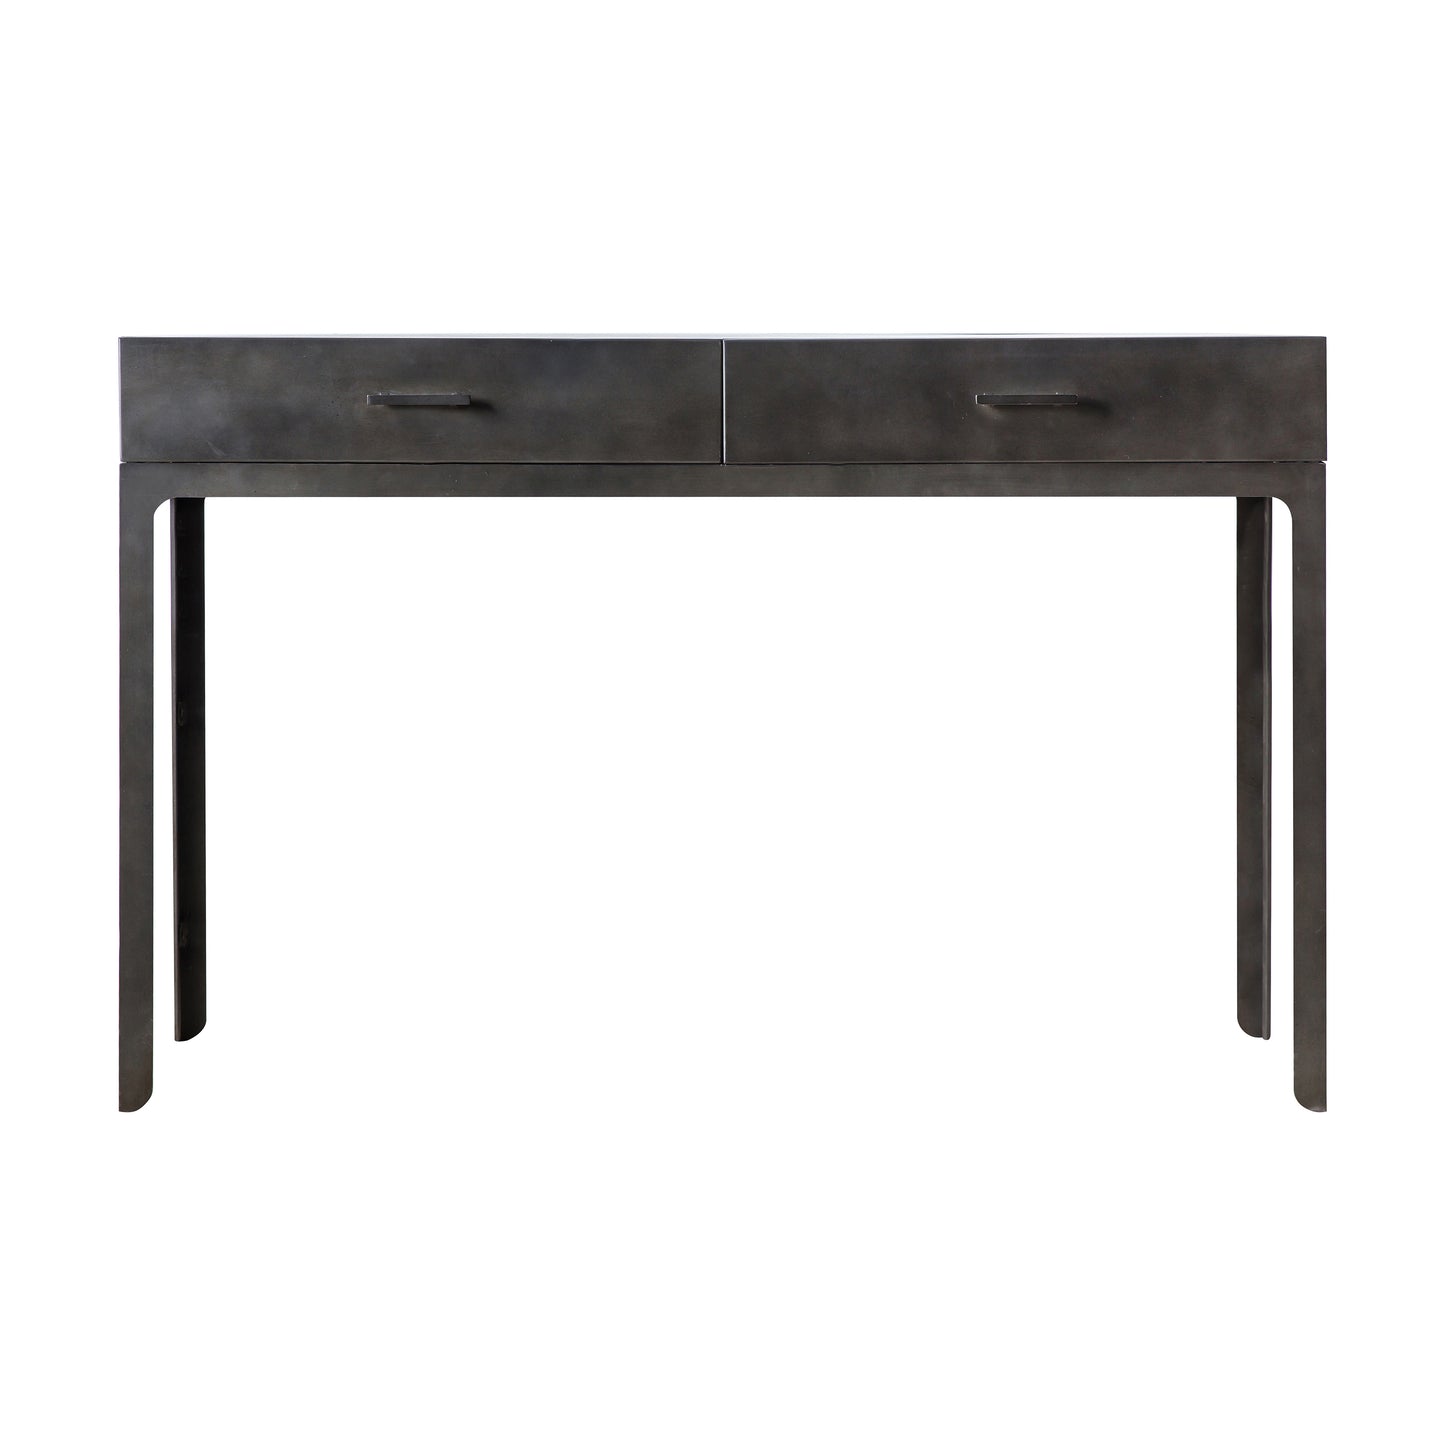 A sleek Ottinge 2 Drawer Desk console table from Kikiathome.co.uk for interior decor and home furniture.